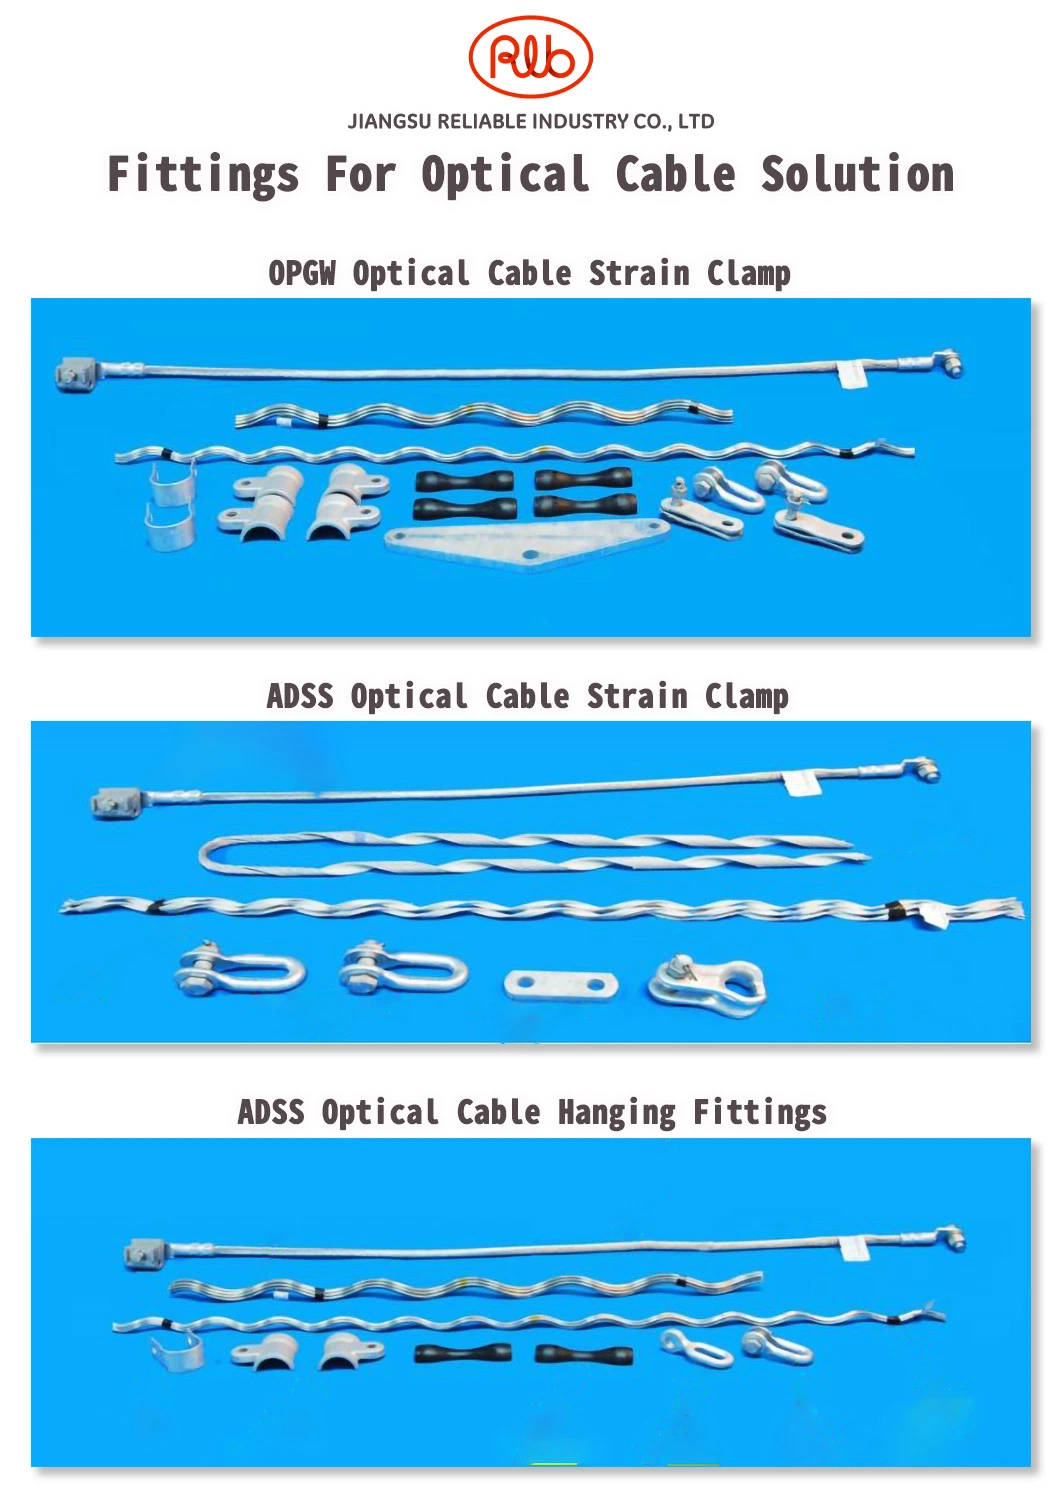 Aluminum Clad Steel Insulated Hanging Fittings for Opgw/ADSS Optical Cable